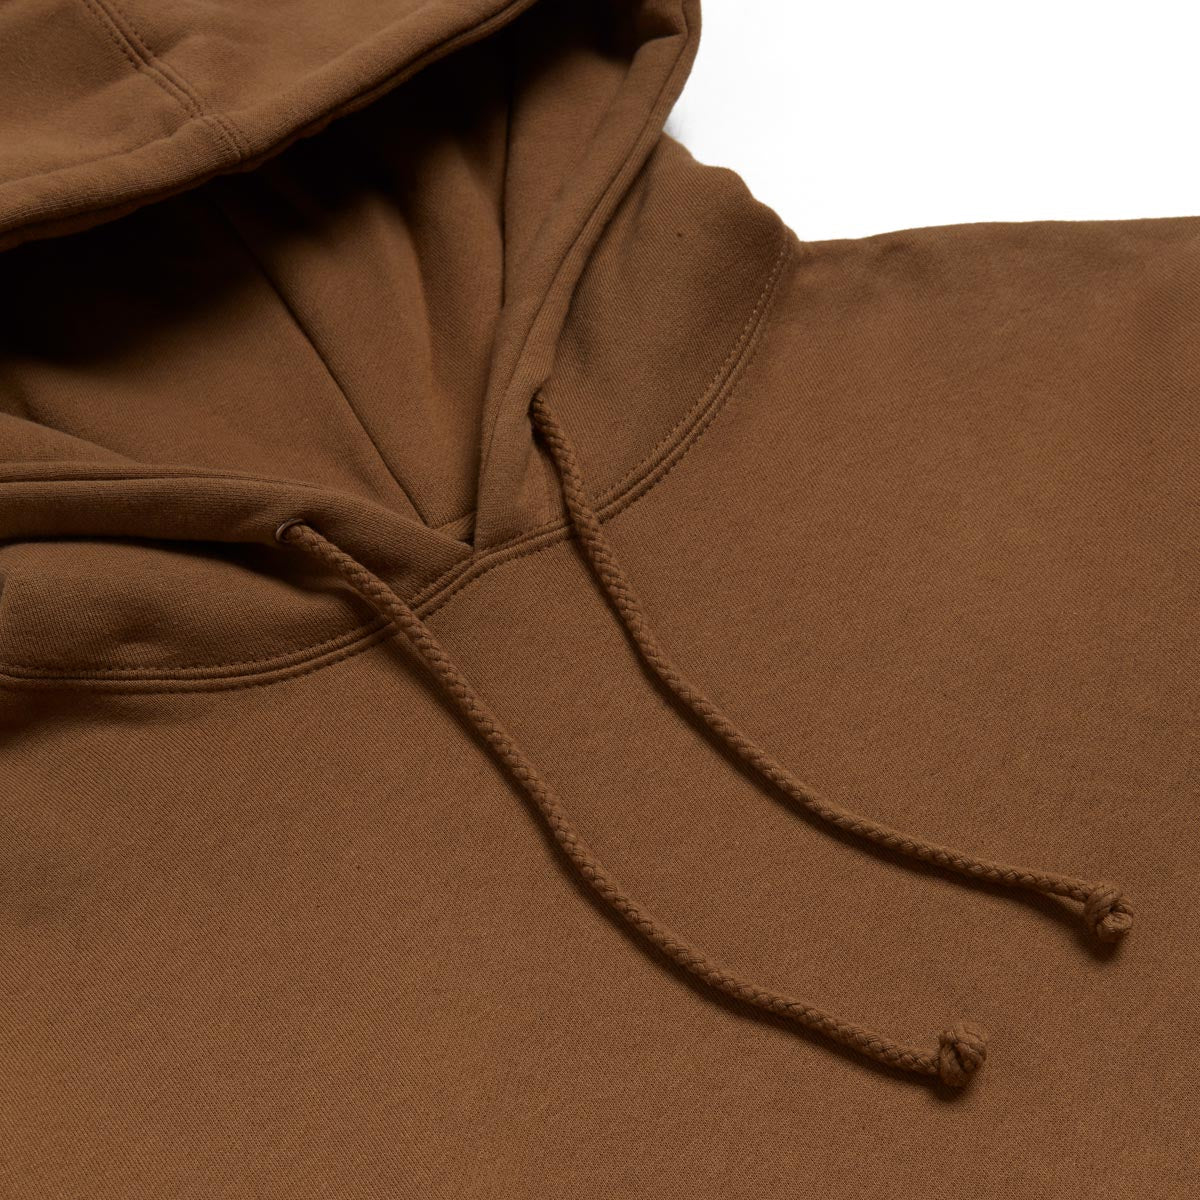 CCS Staple Pullover Hoodie - Camel image 2